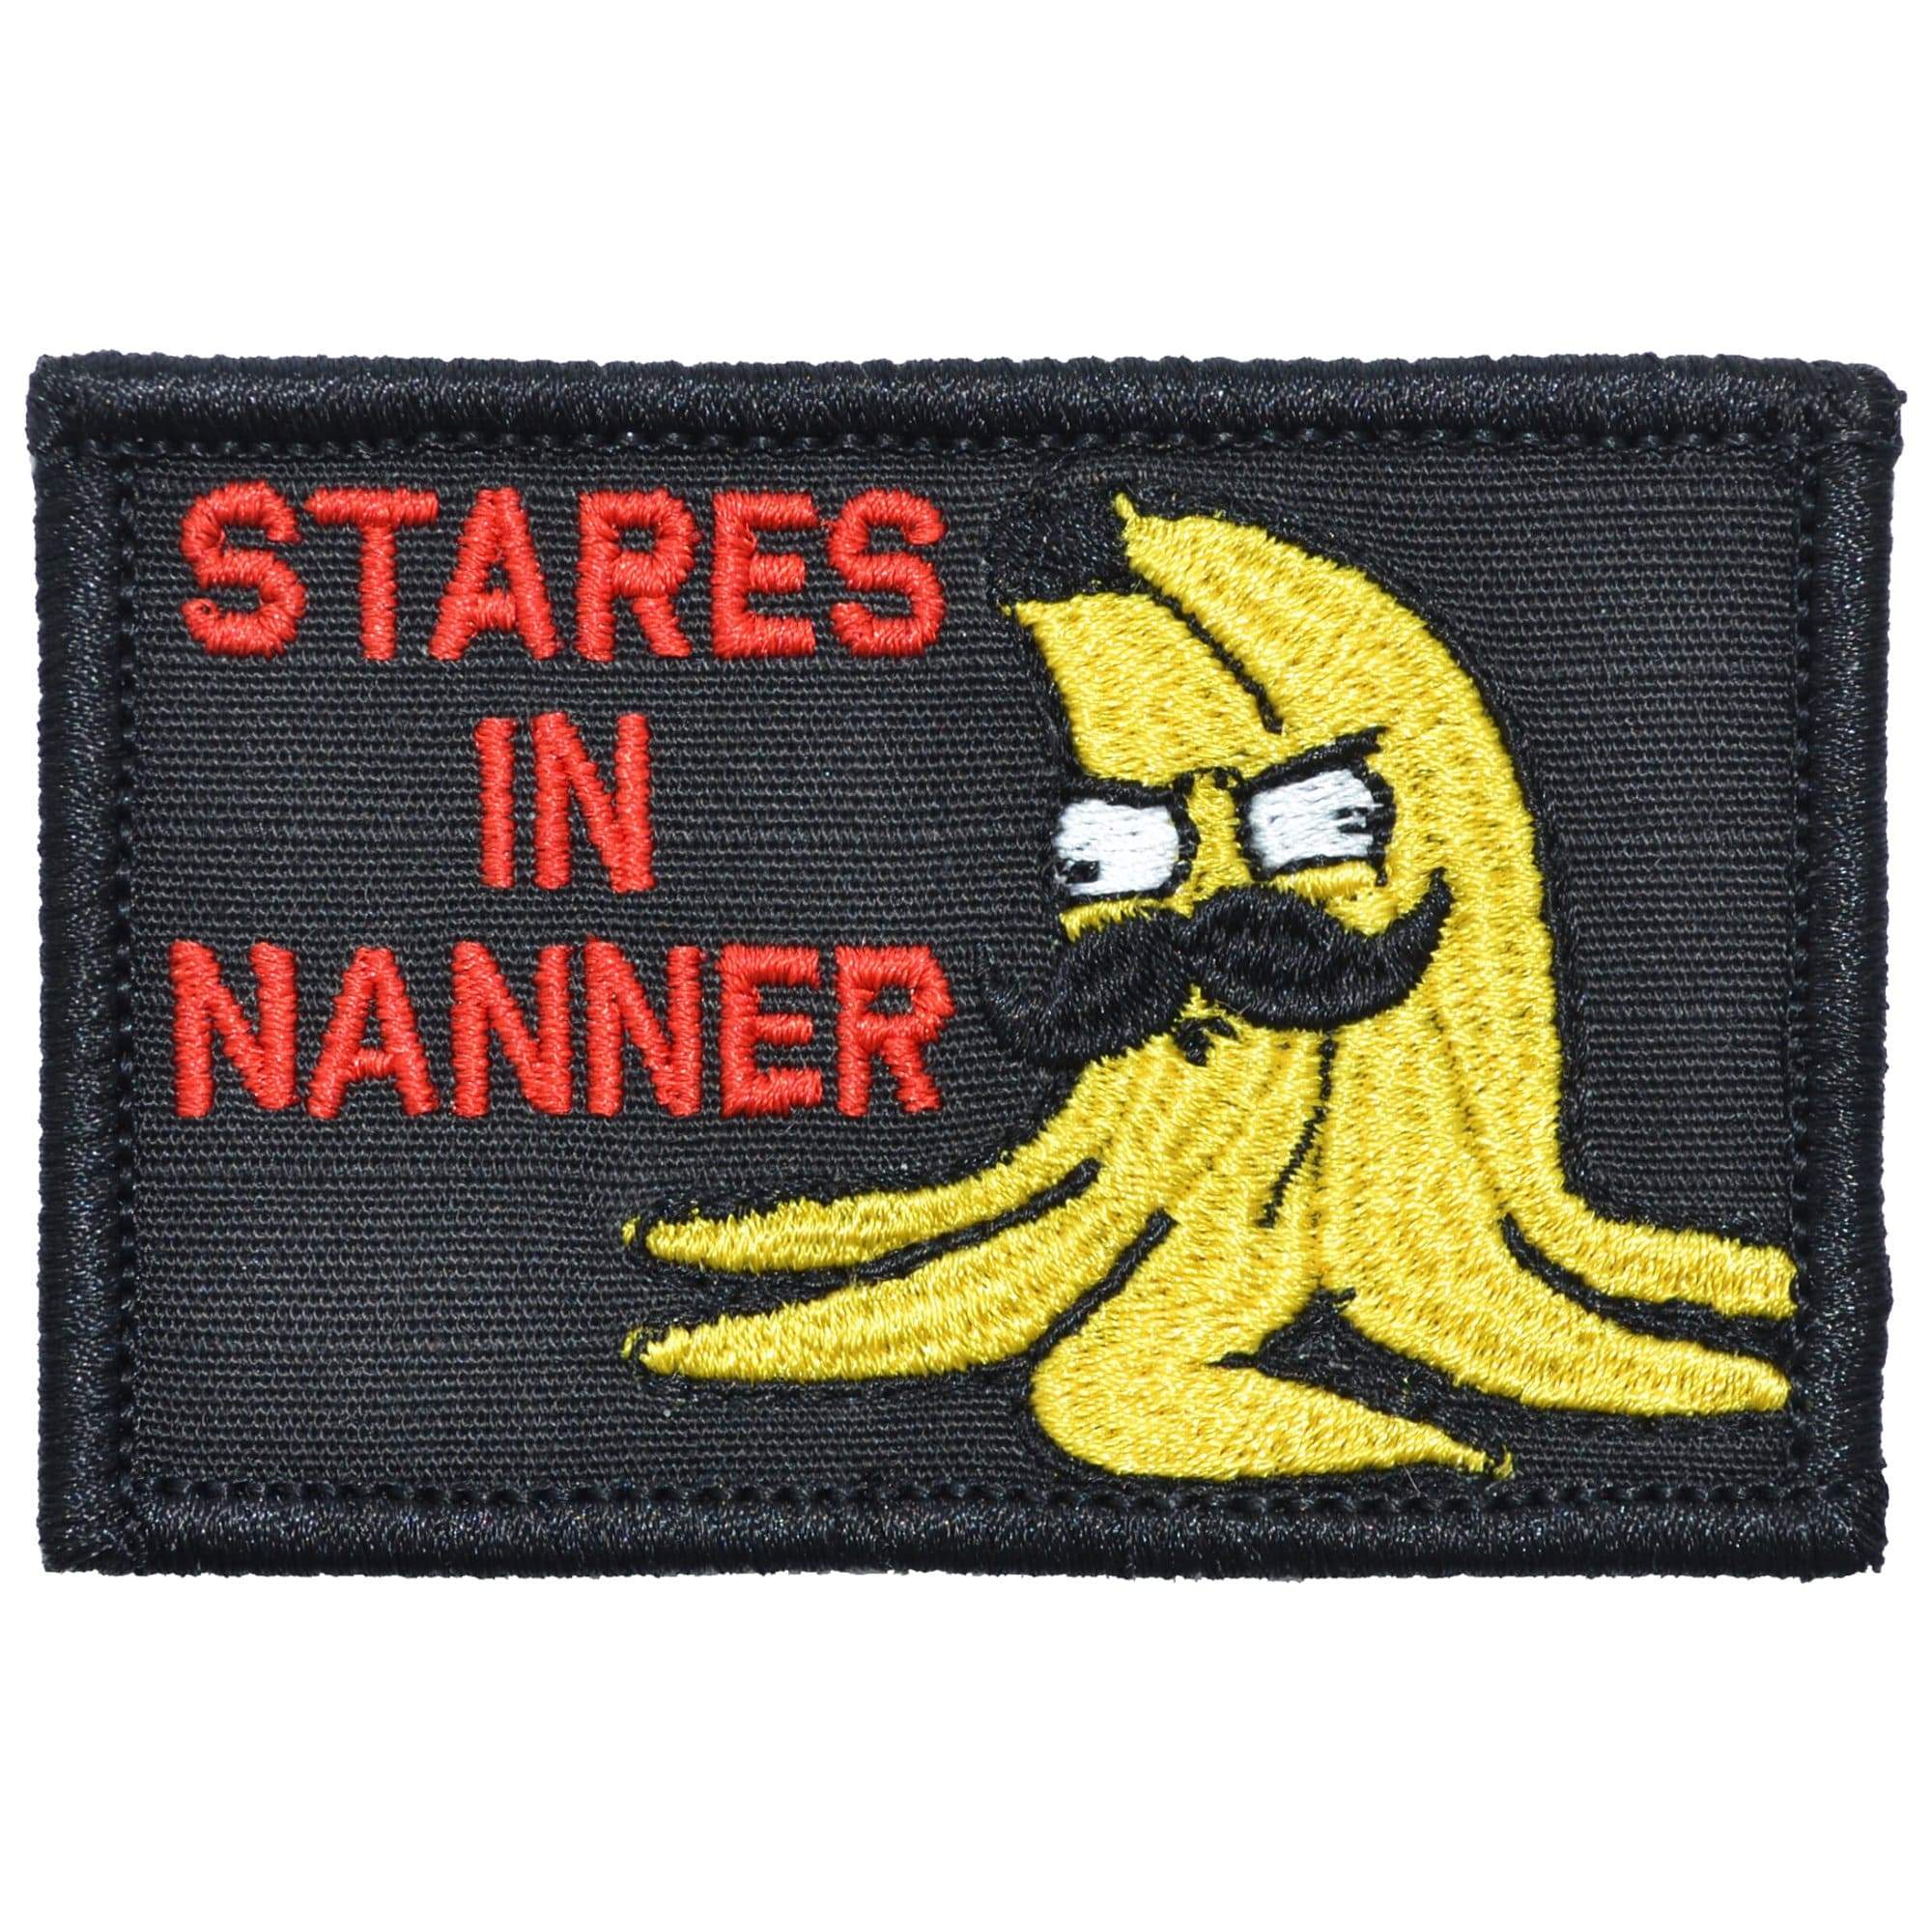 Tactical Gear Junkie Patches Black Sketch's World © Stares In Nanner - 2x3 Patch